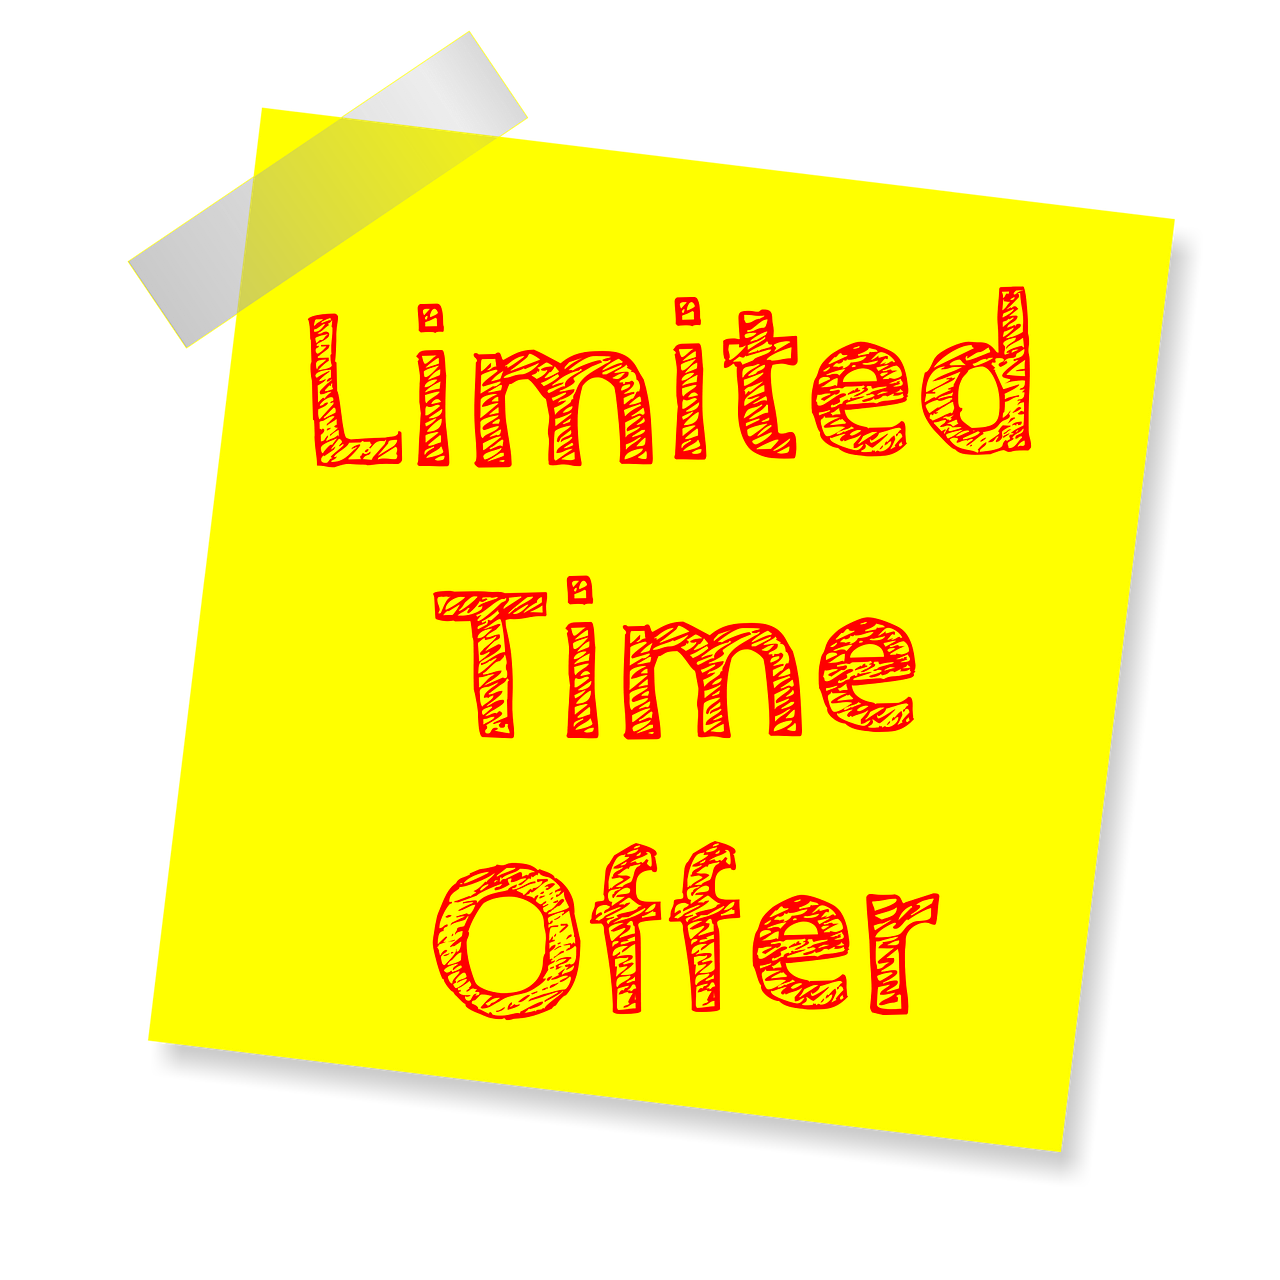 limited time offer in written style on a yellow sticky note